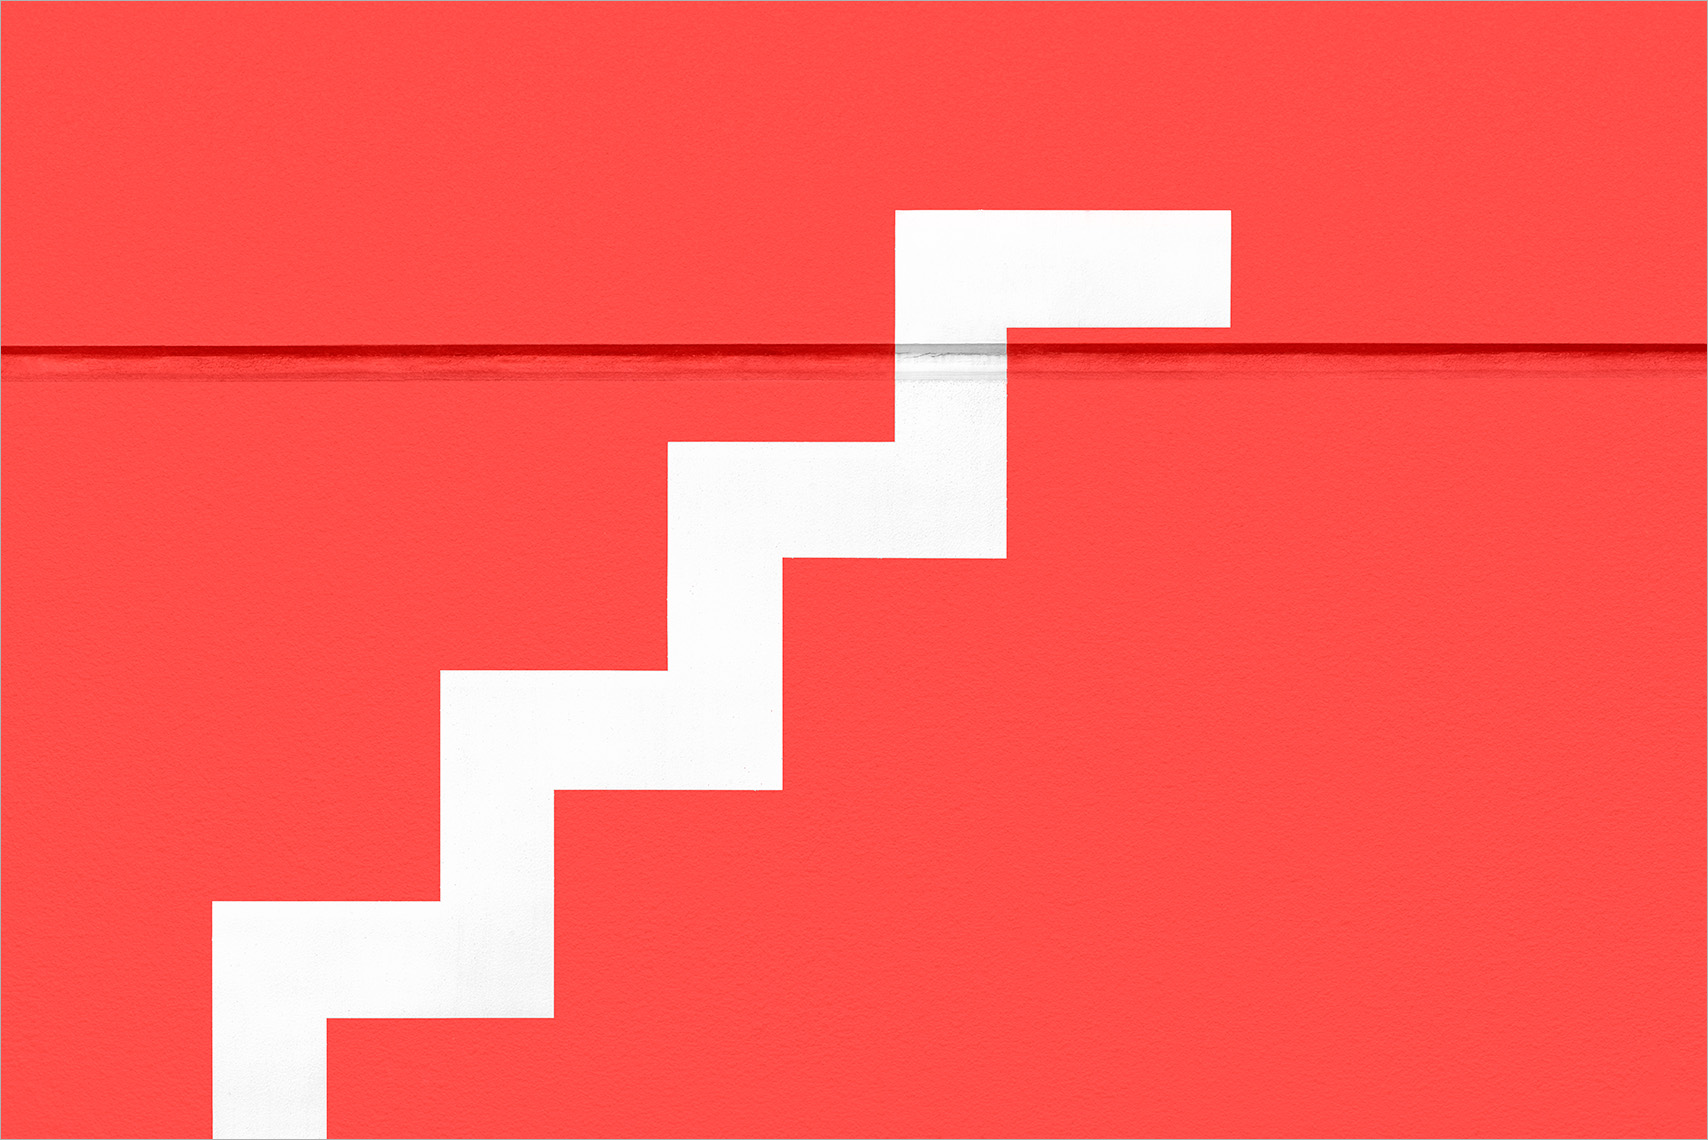 Zoe Wetherall / Architecture / Red Stair